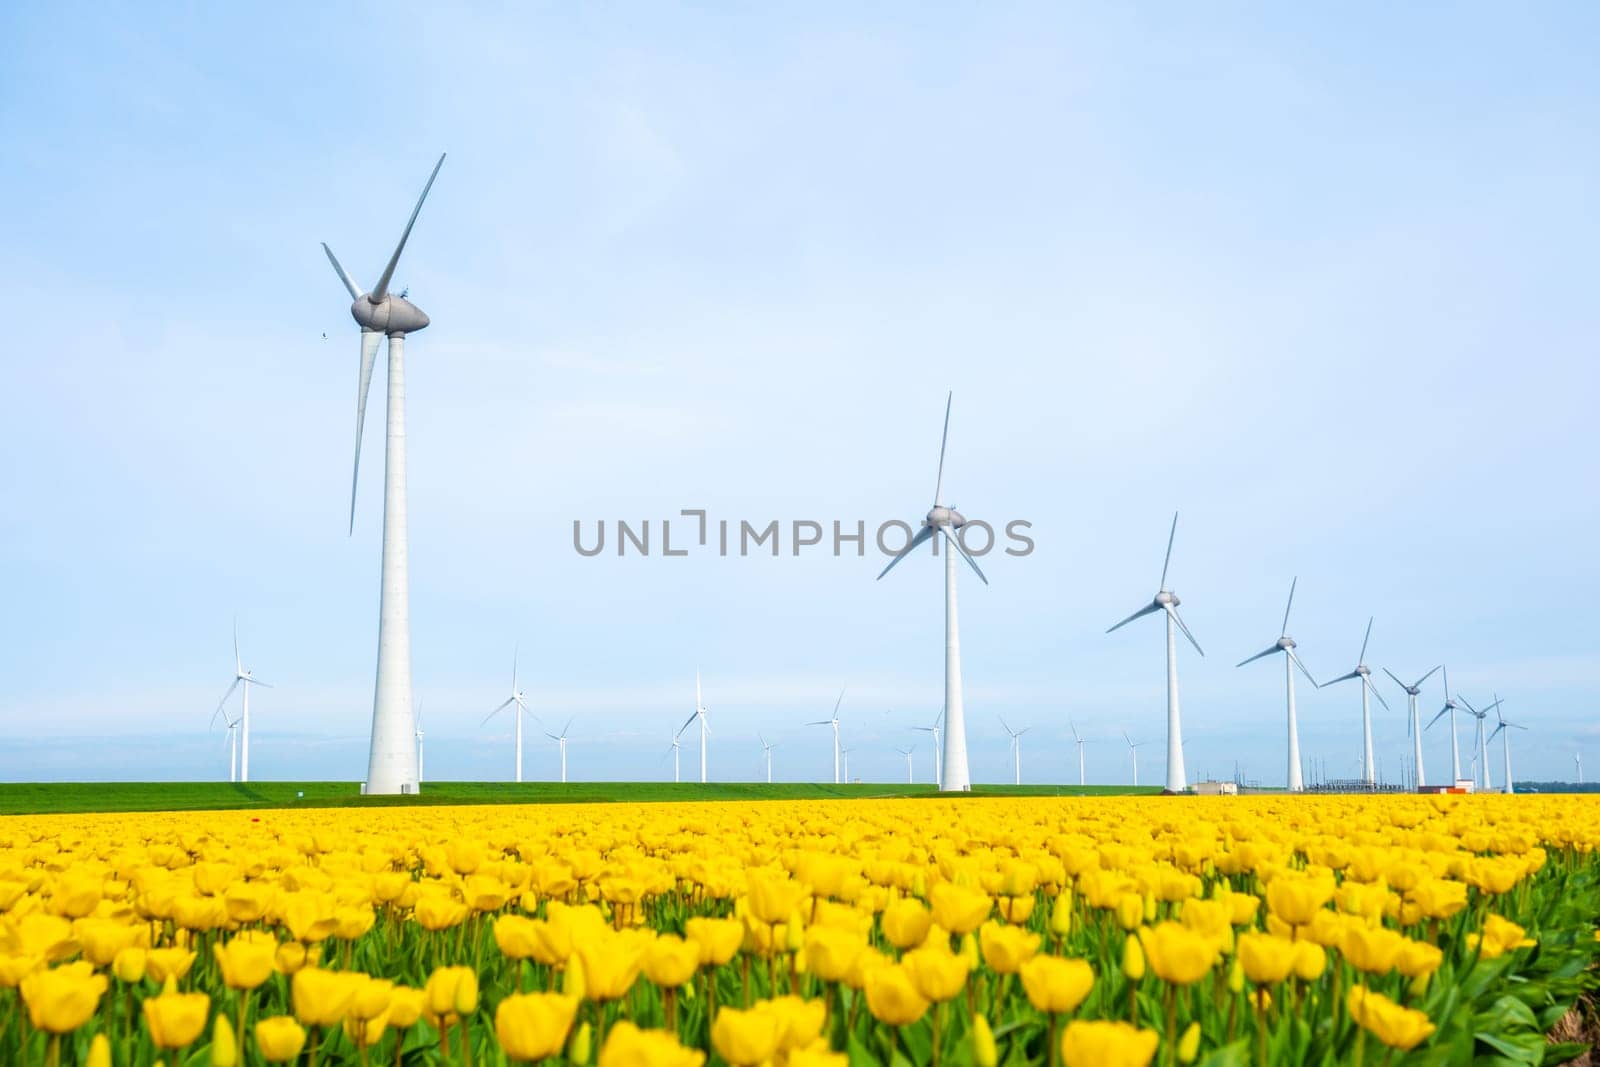 windmill park with tulip flowers in Spring, windmill turbines in the Netherlands Europe. windmill turbines in the Noordoostpolder Flevoland, energy transition